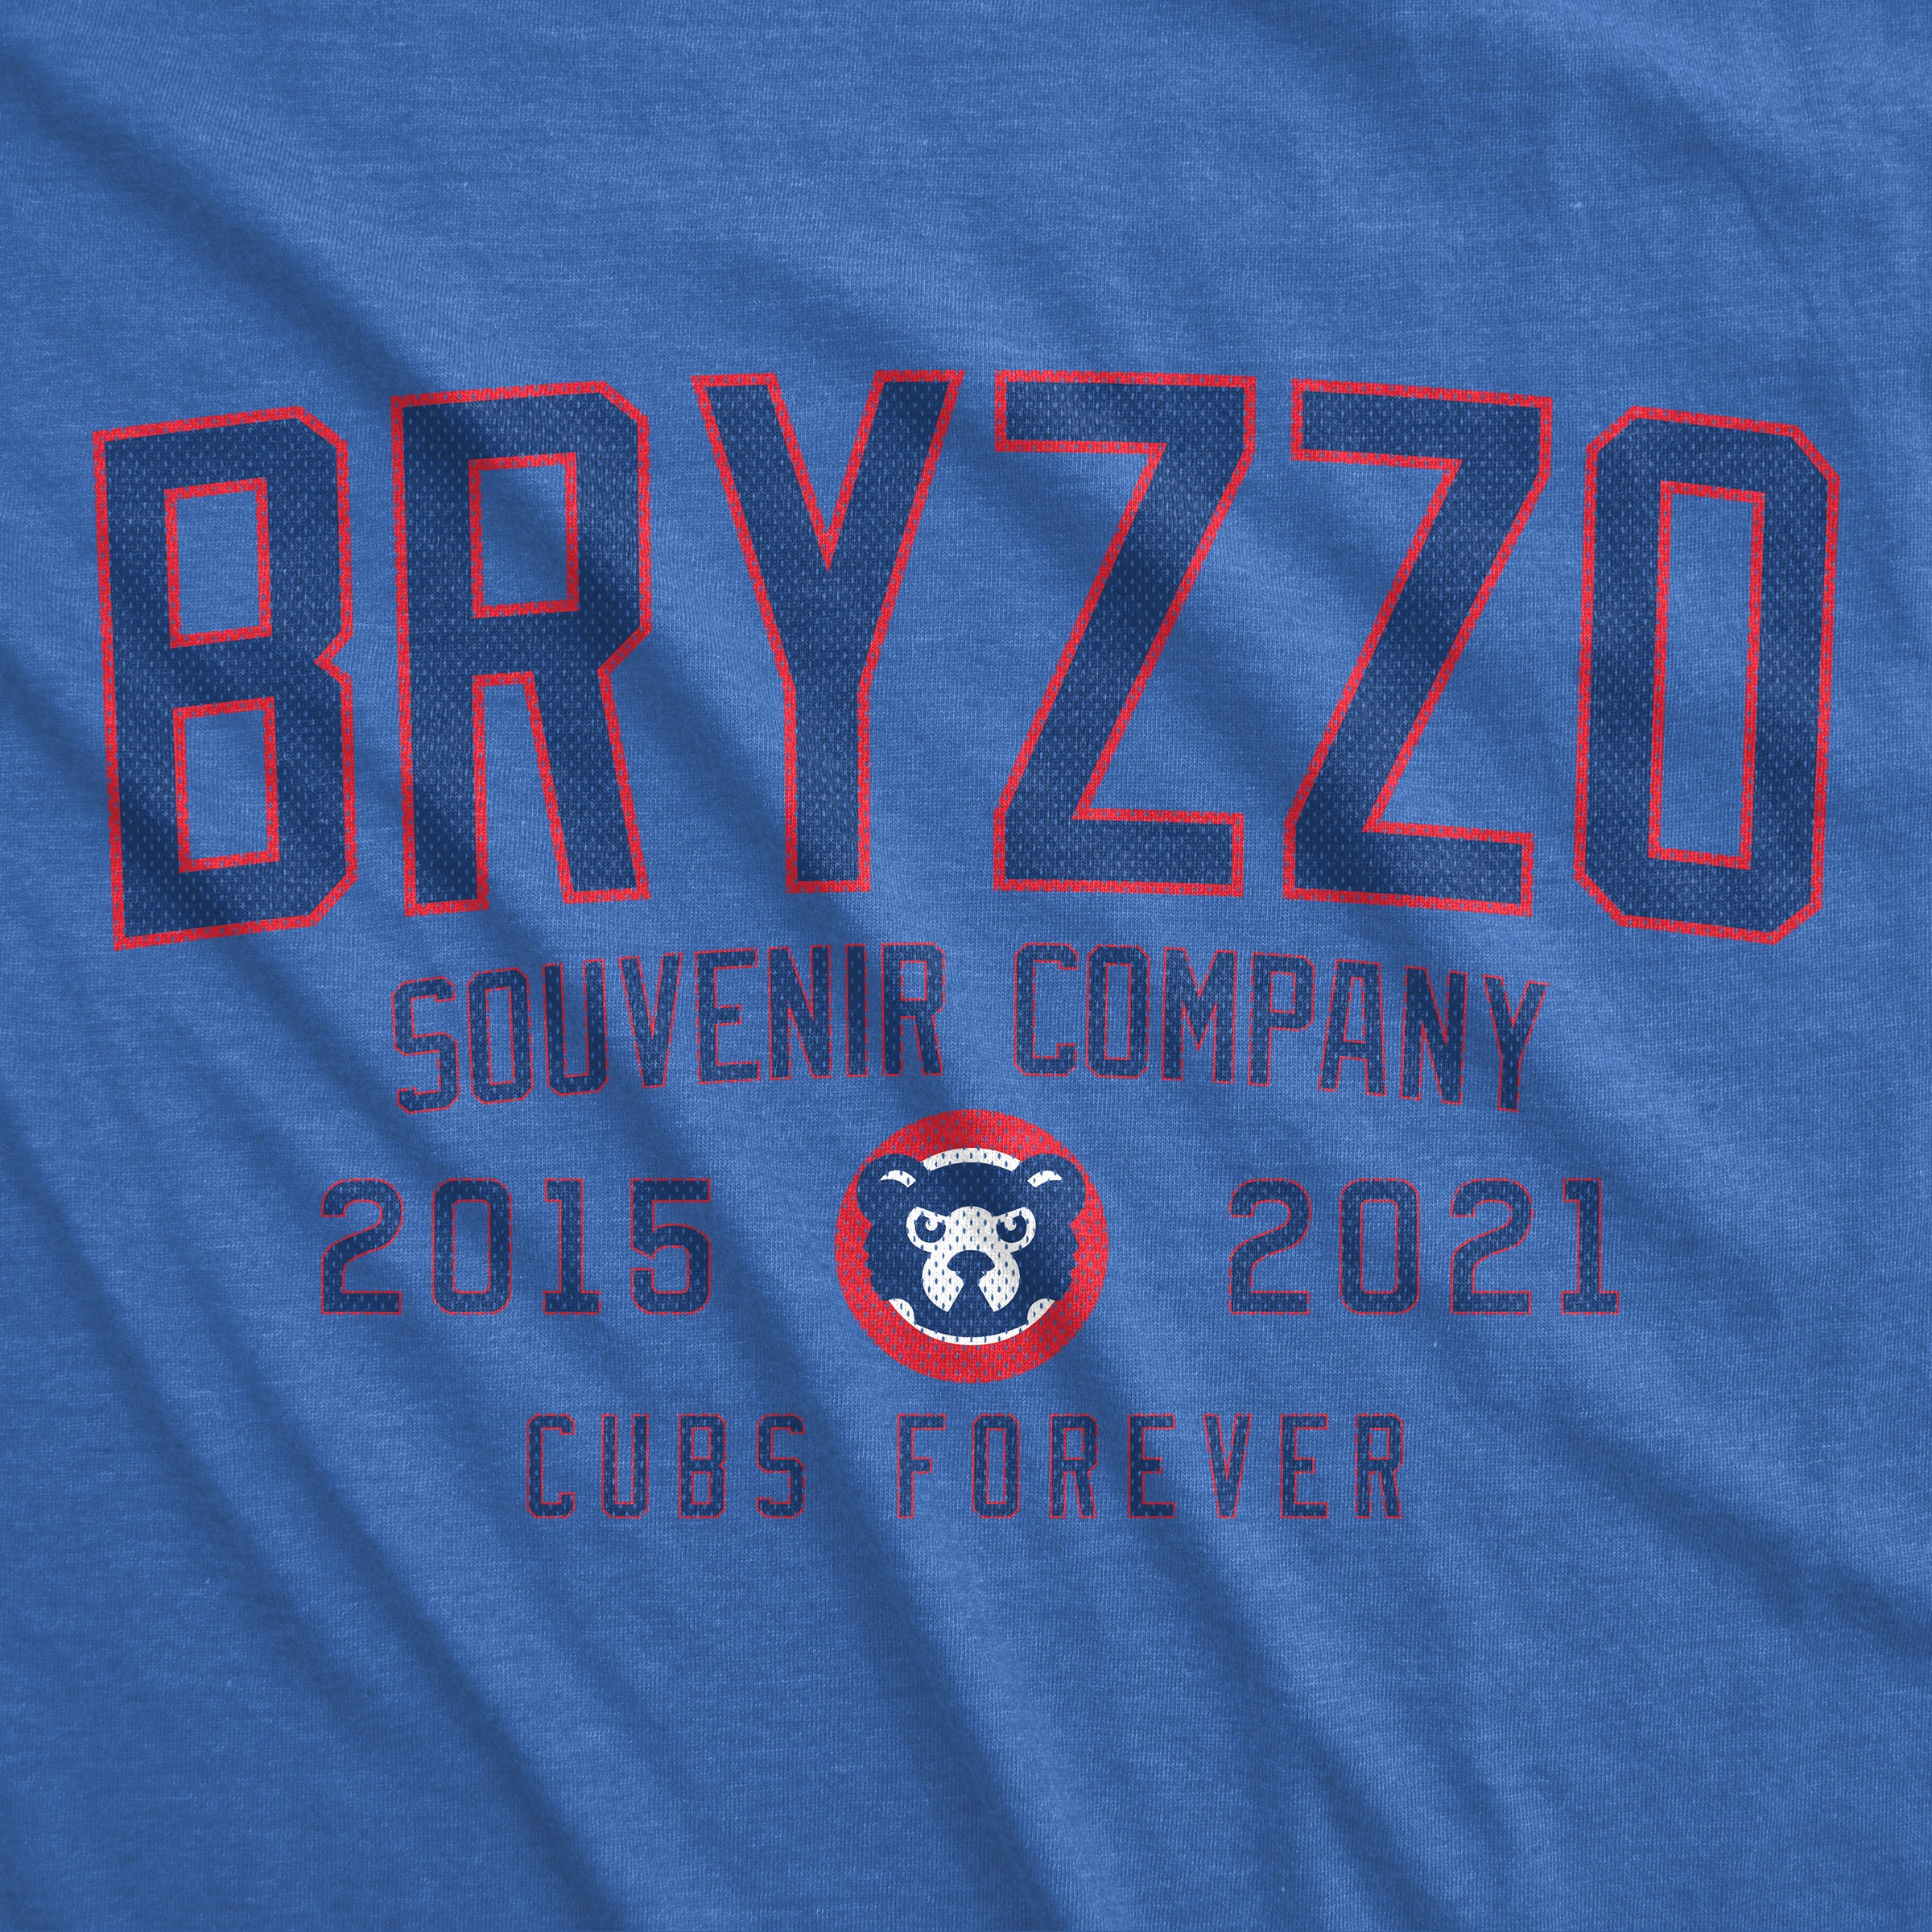 Bryzzo: Cubs Forever